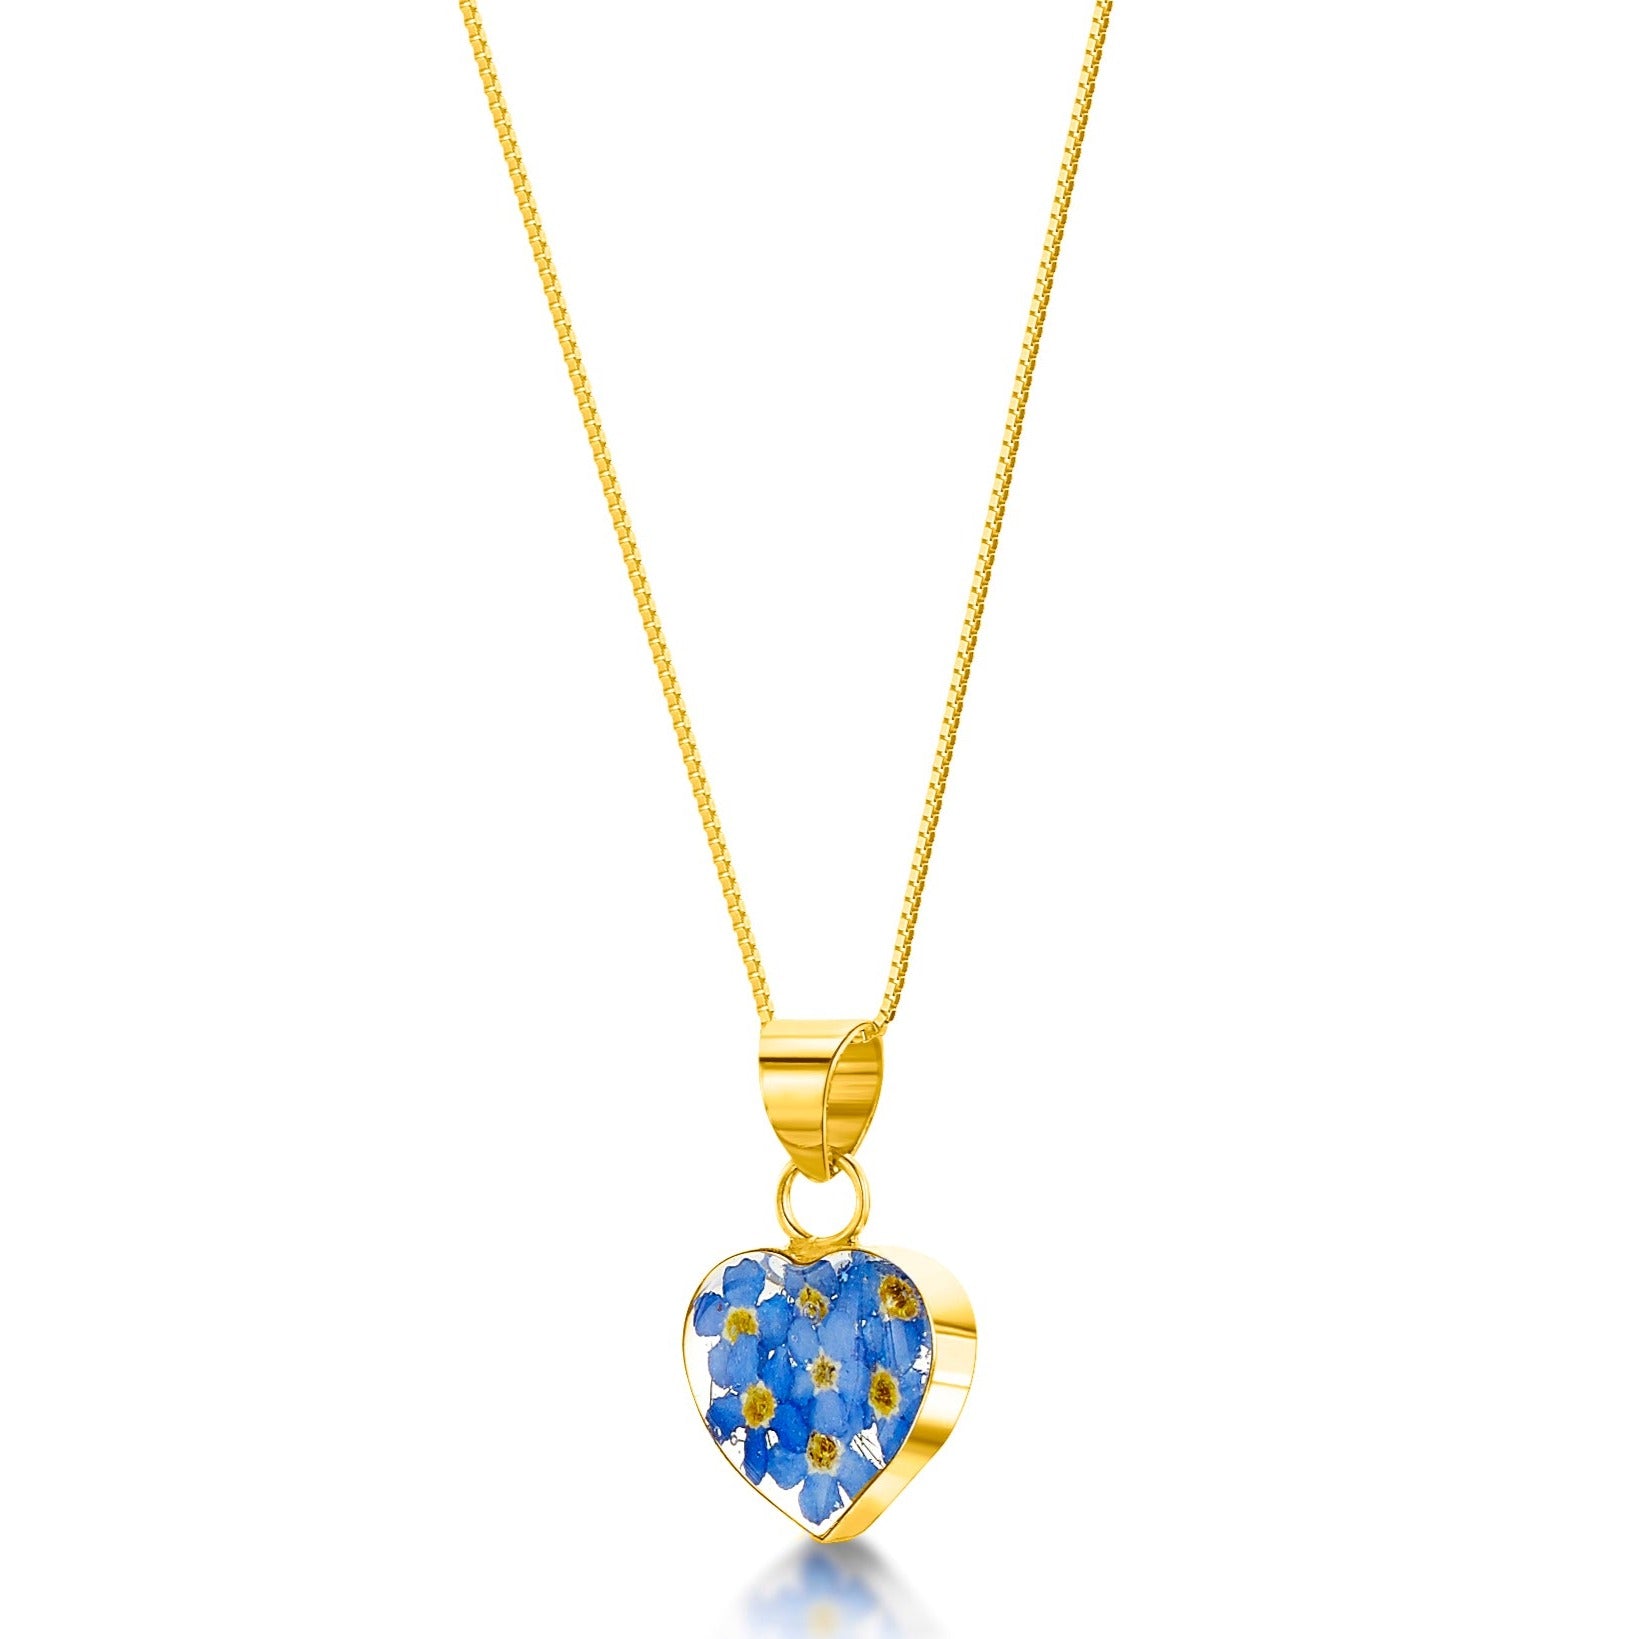 Forget-me-not gold-plated heart pendant